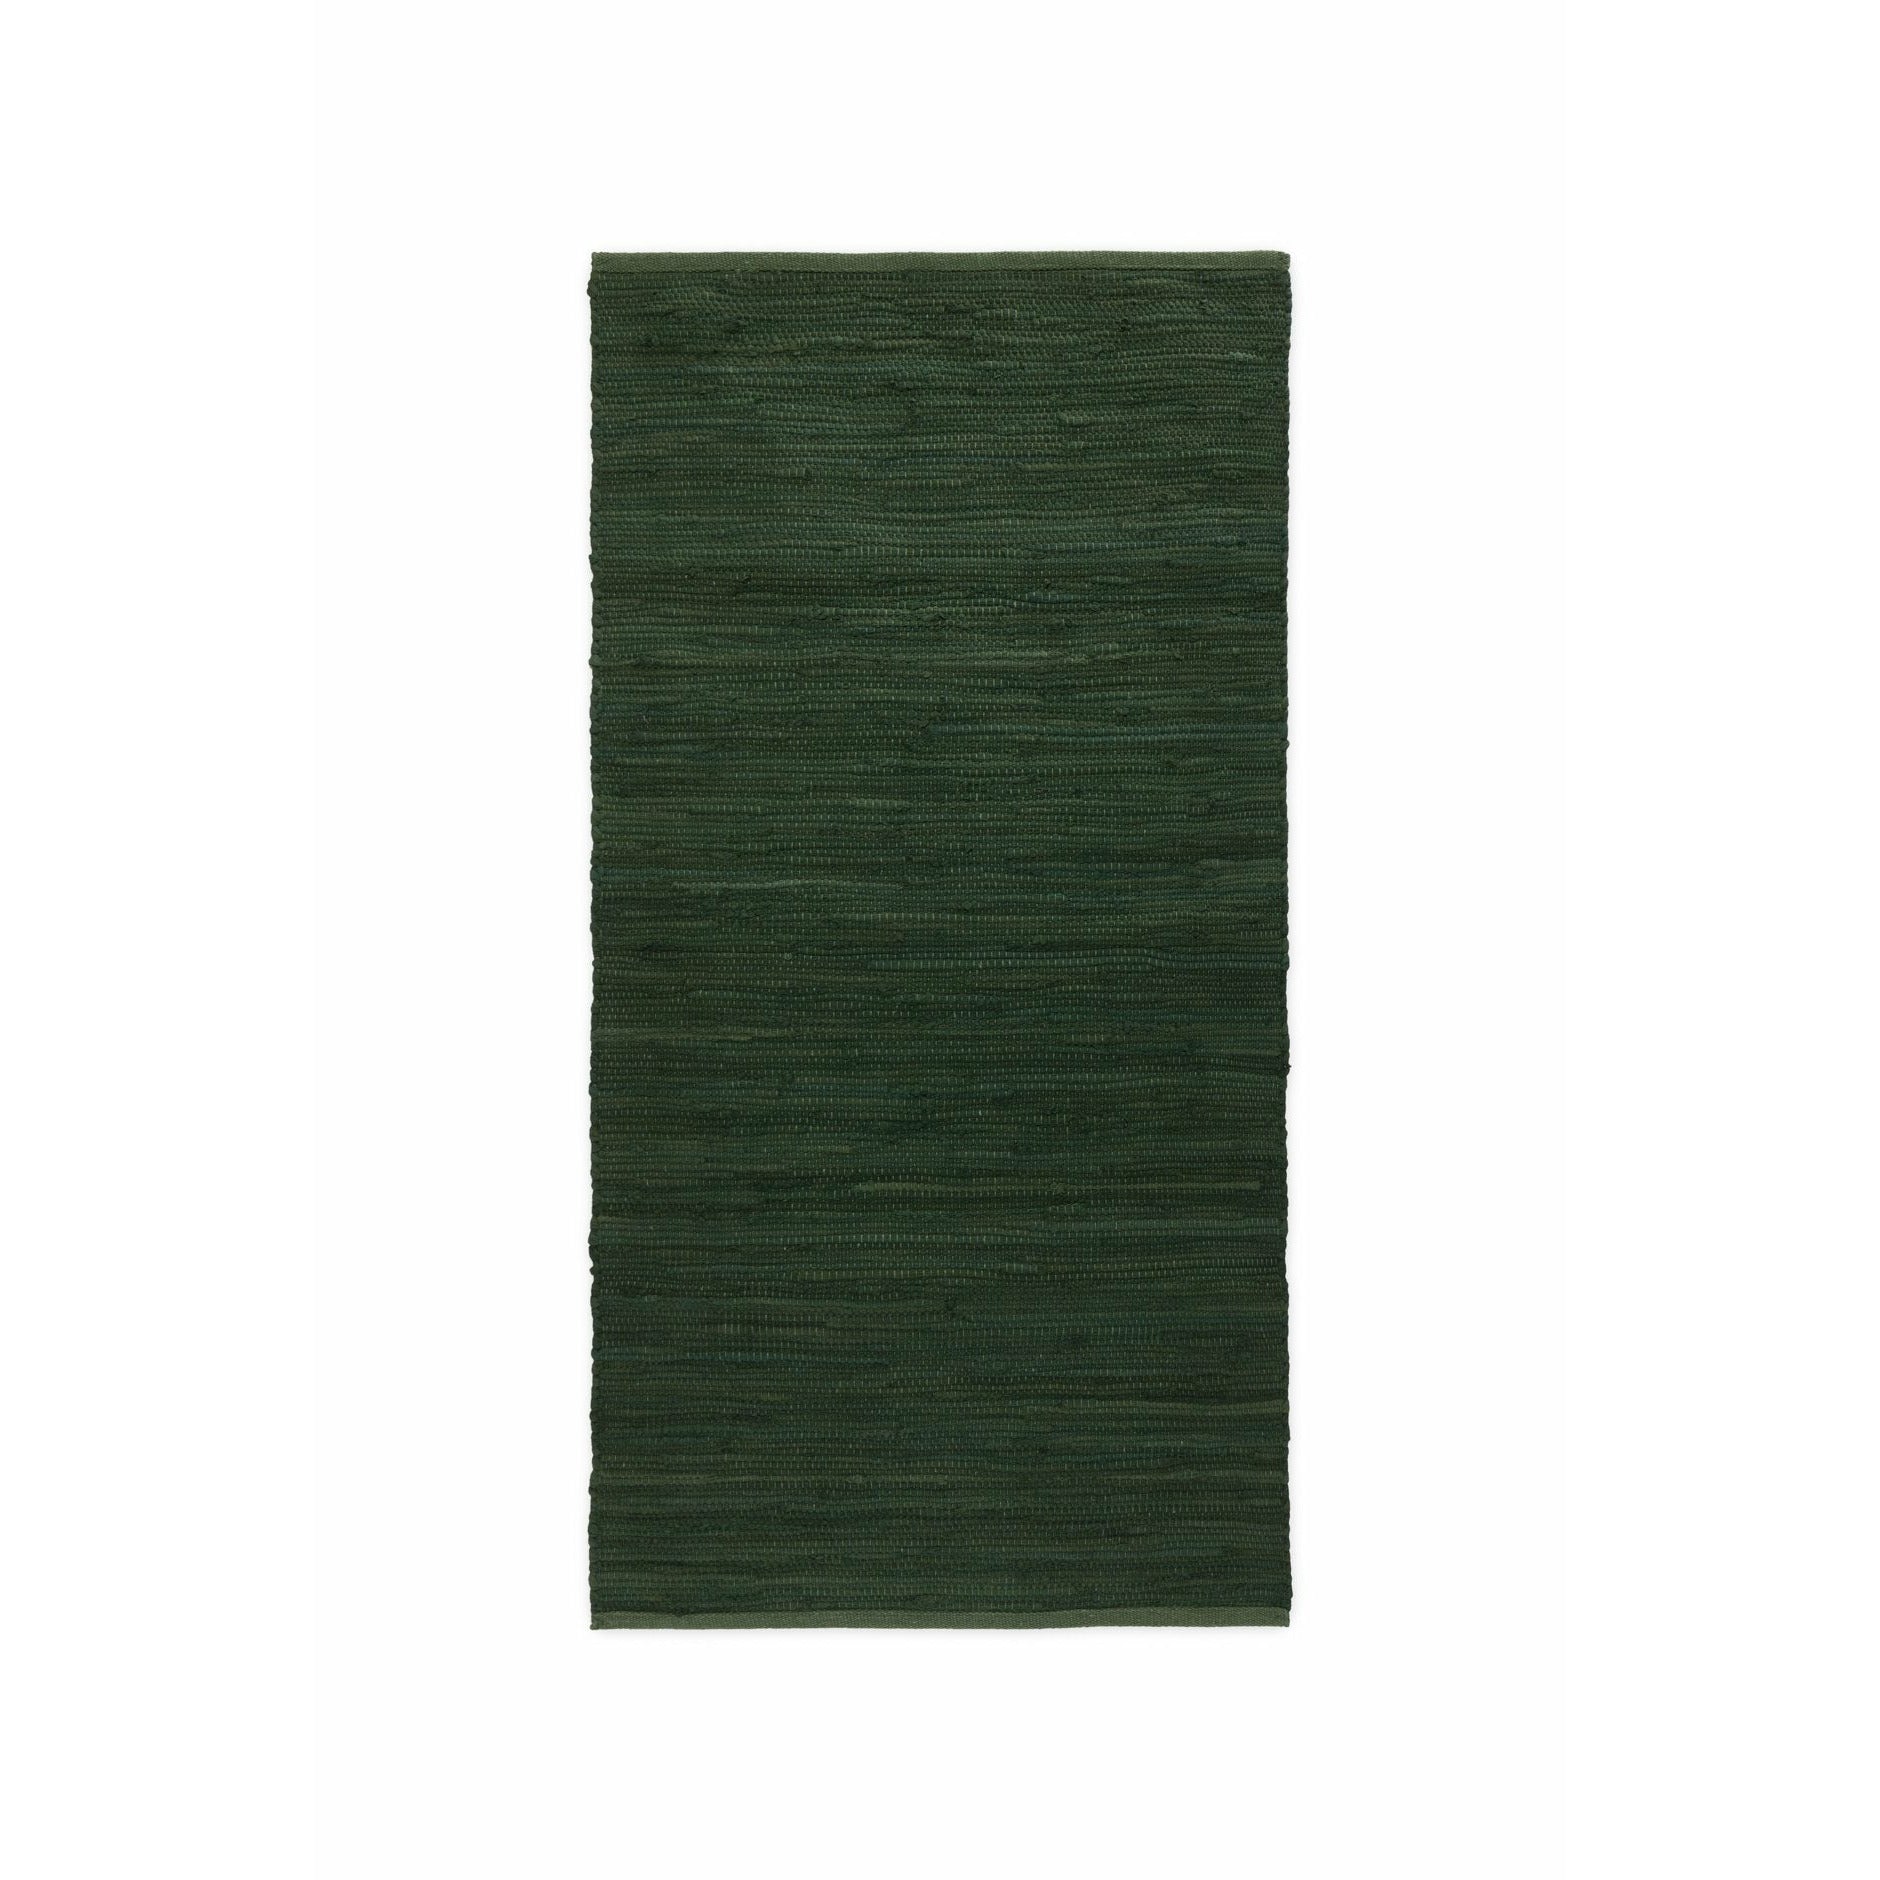 Rug Solid Cotton Teppich Guilty Green, 140 x 200 cm-Teppiche-Rug Solid-5711655207762-20776-RUG-inwohn